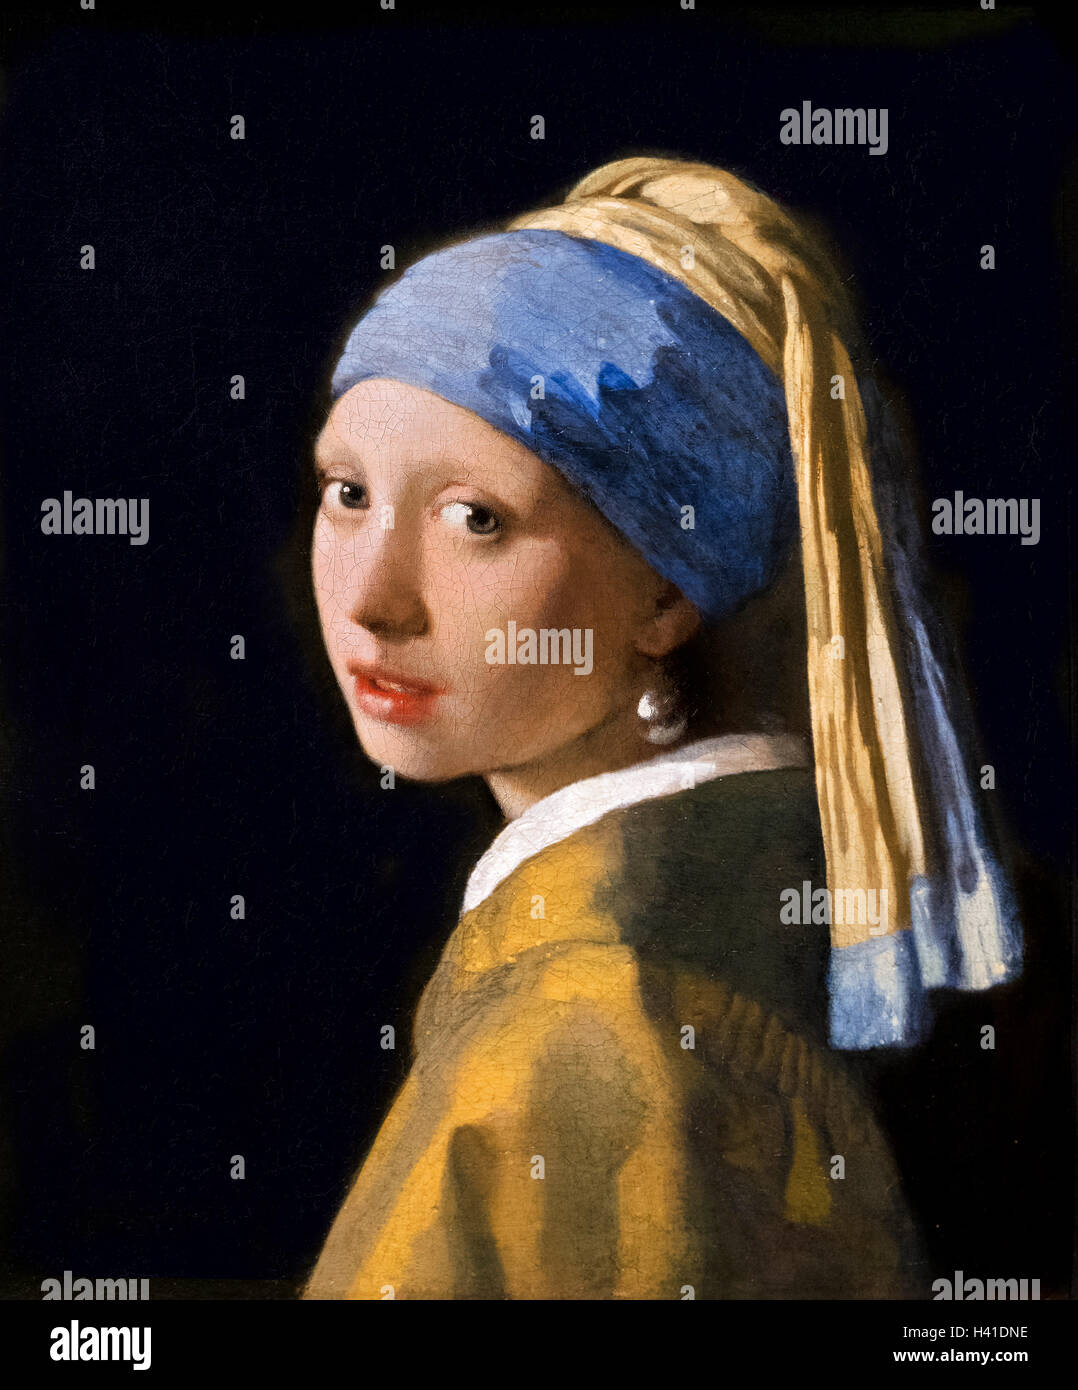 Johannes Vermeer, Girl with a Pearl Earring (Meisje met de parel), oil on canvas, c.1665. Painting on display in the Mauritshuis, The Hague, Netherlands. Stock Photo